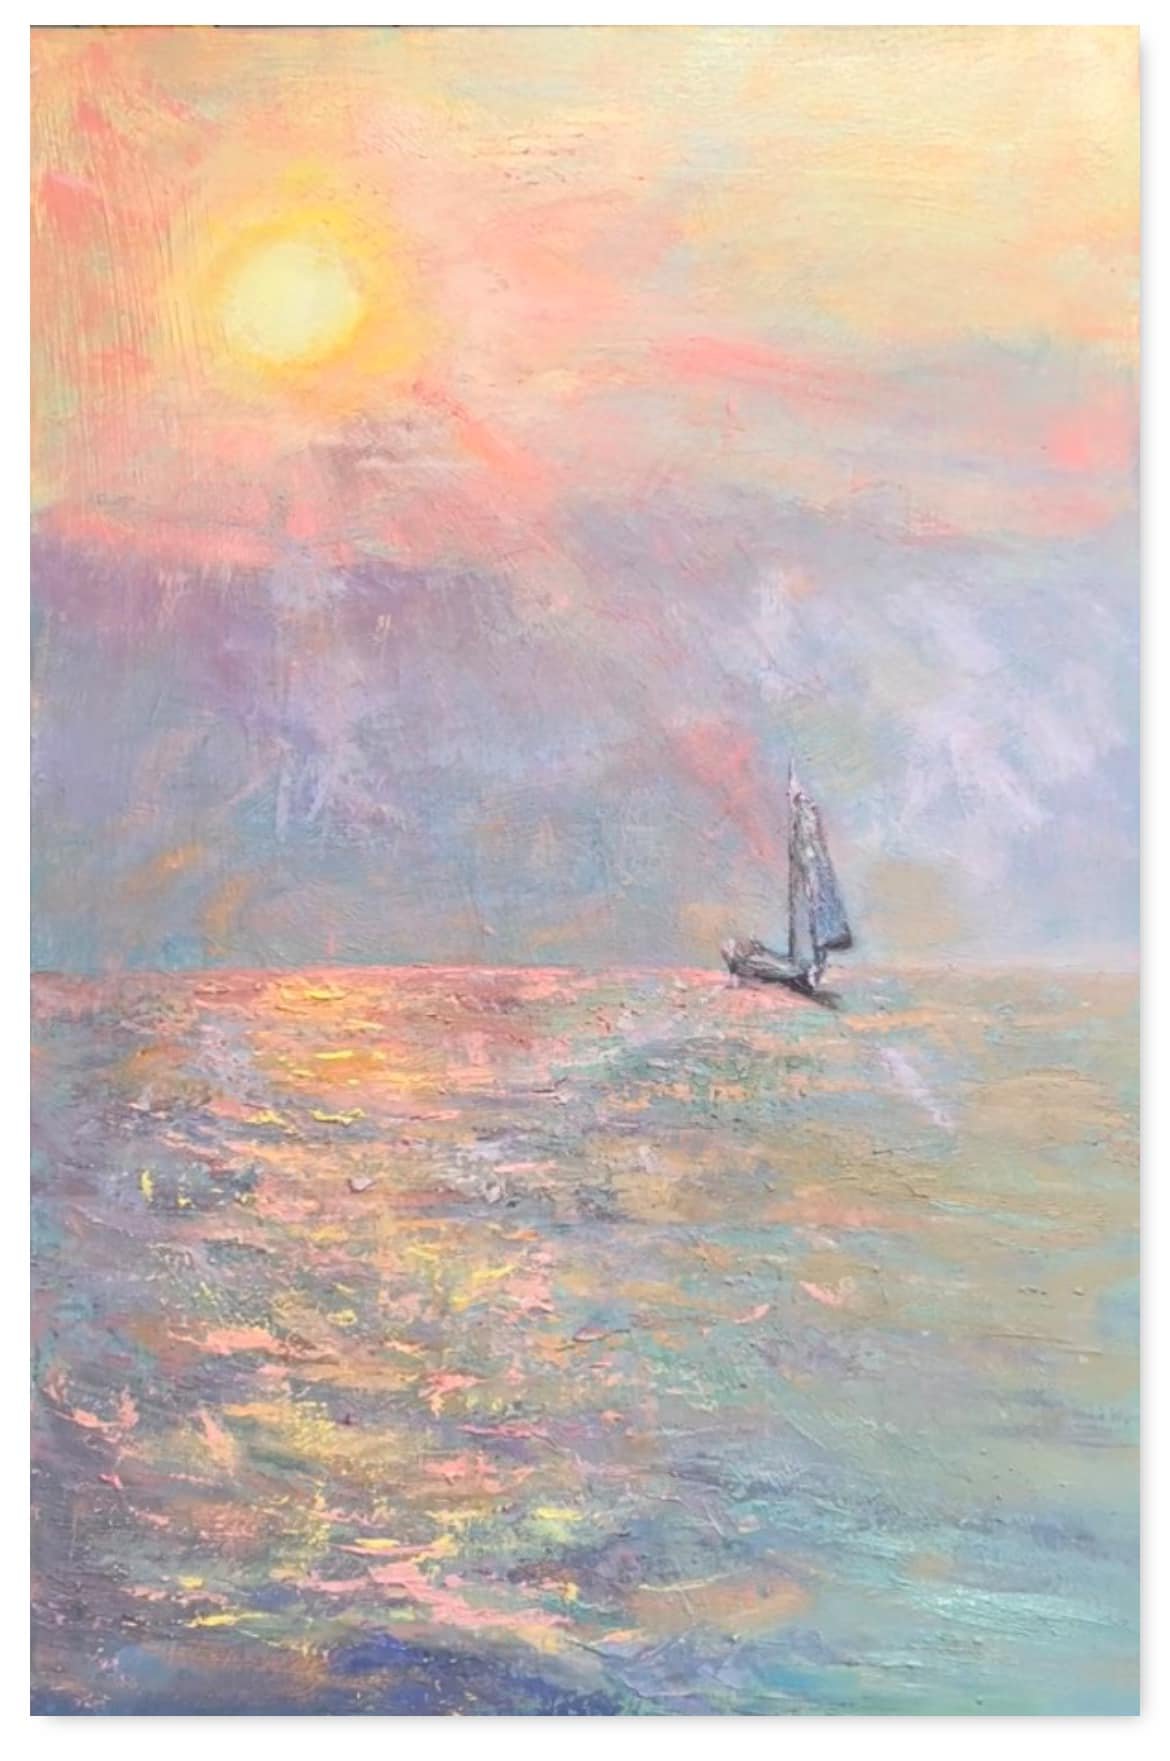 Into The Horizon: This original oil painting, 36x24 inches, is inspired by our family&rsquo;s sunset sail from Block Island, Rhode Island. Captained by Alex, a young lad from Ireland, we set out from the Block Island Club and sailed out of the Great 